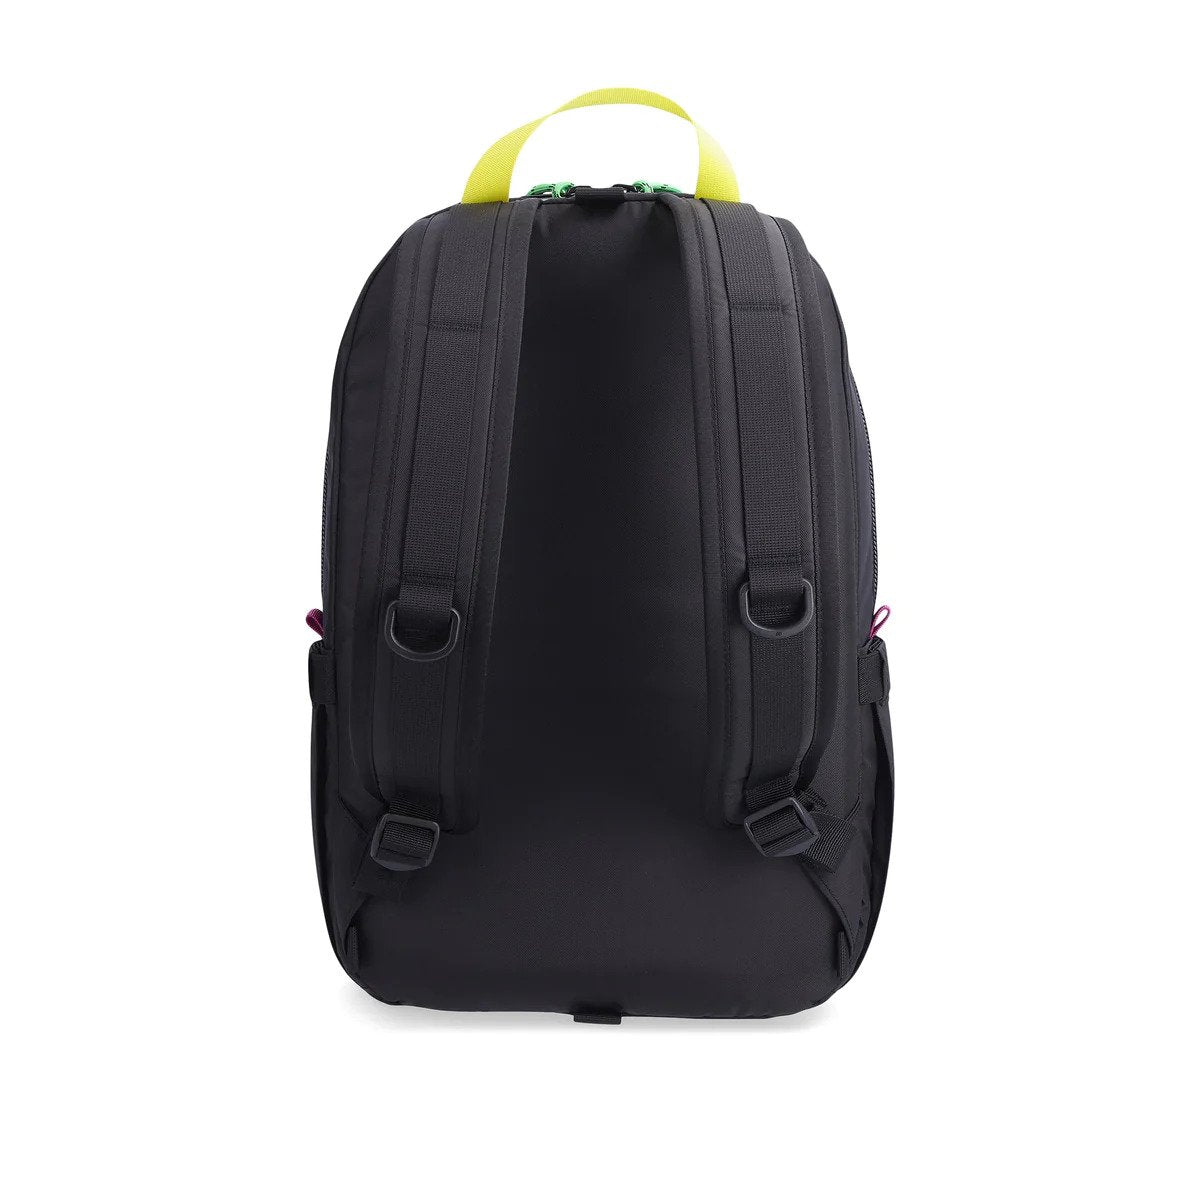 Back view of Topo Designs Light Pack in recycled "Black / Pink" nylon.